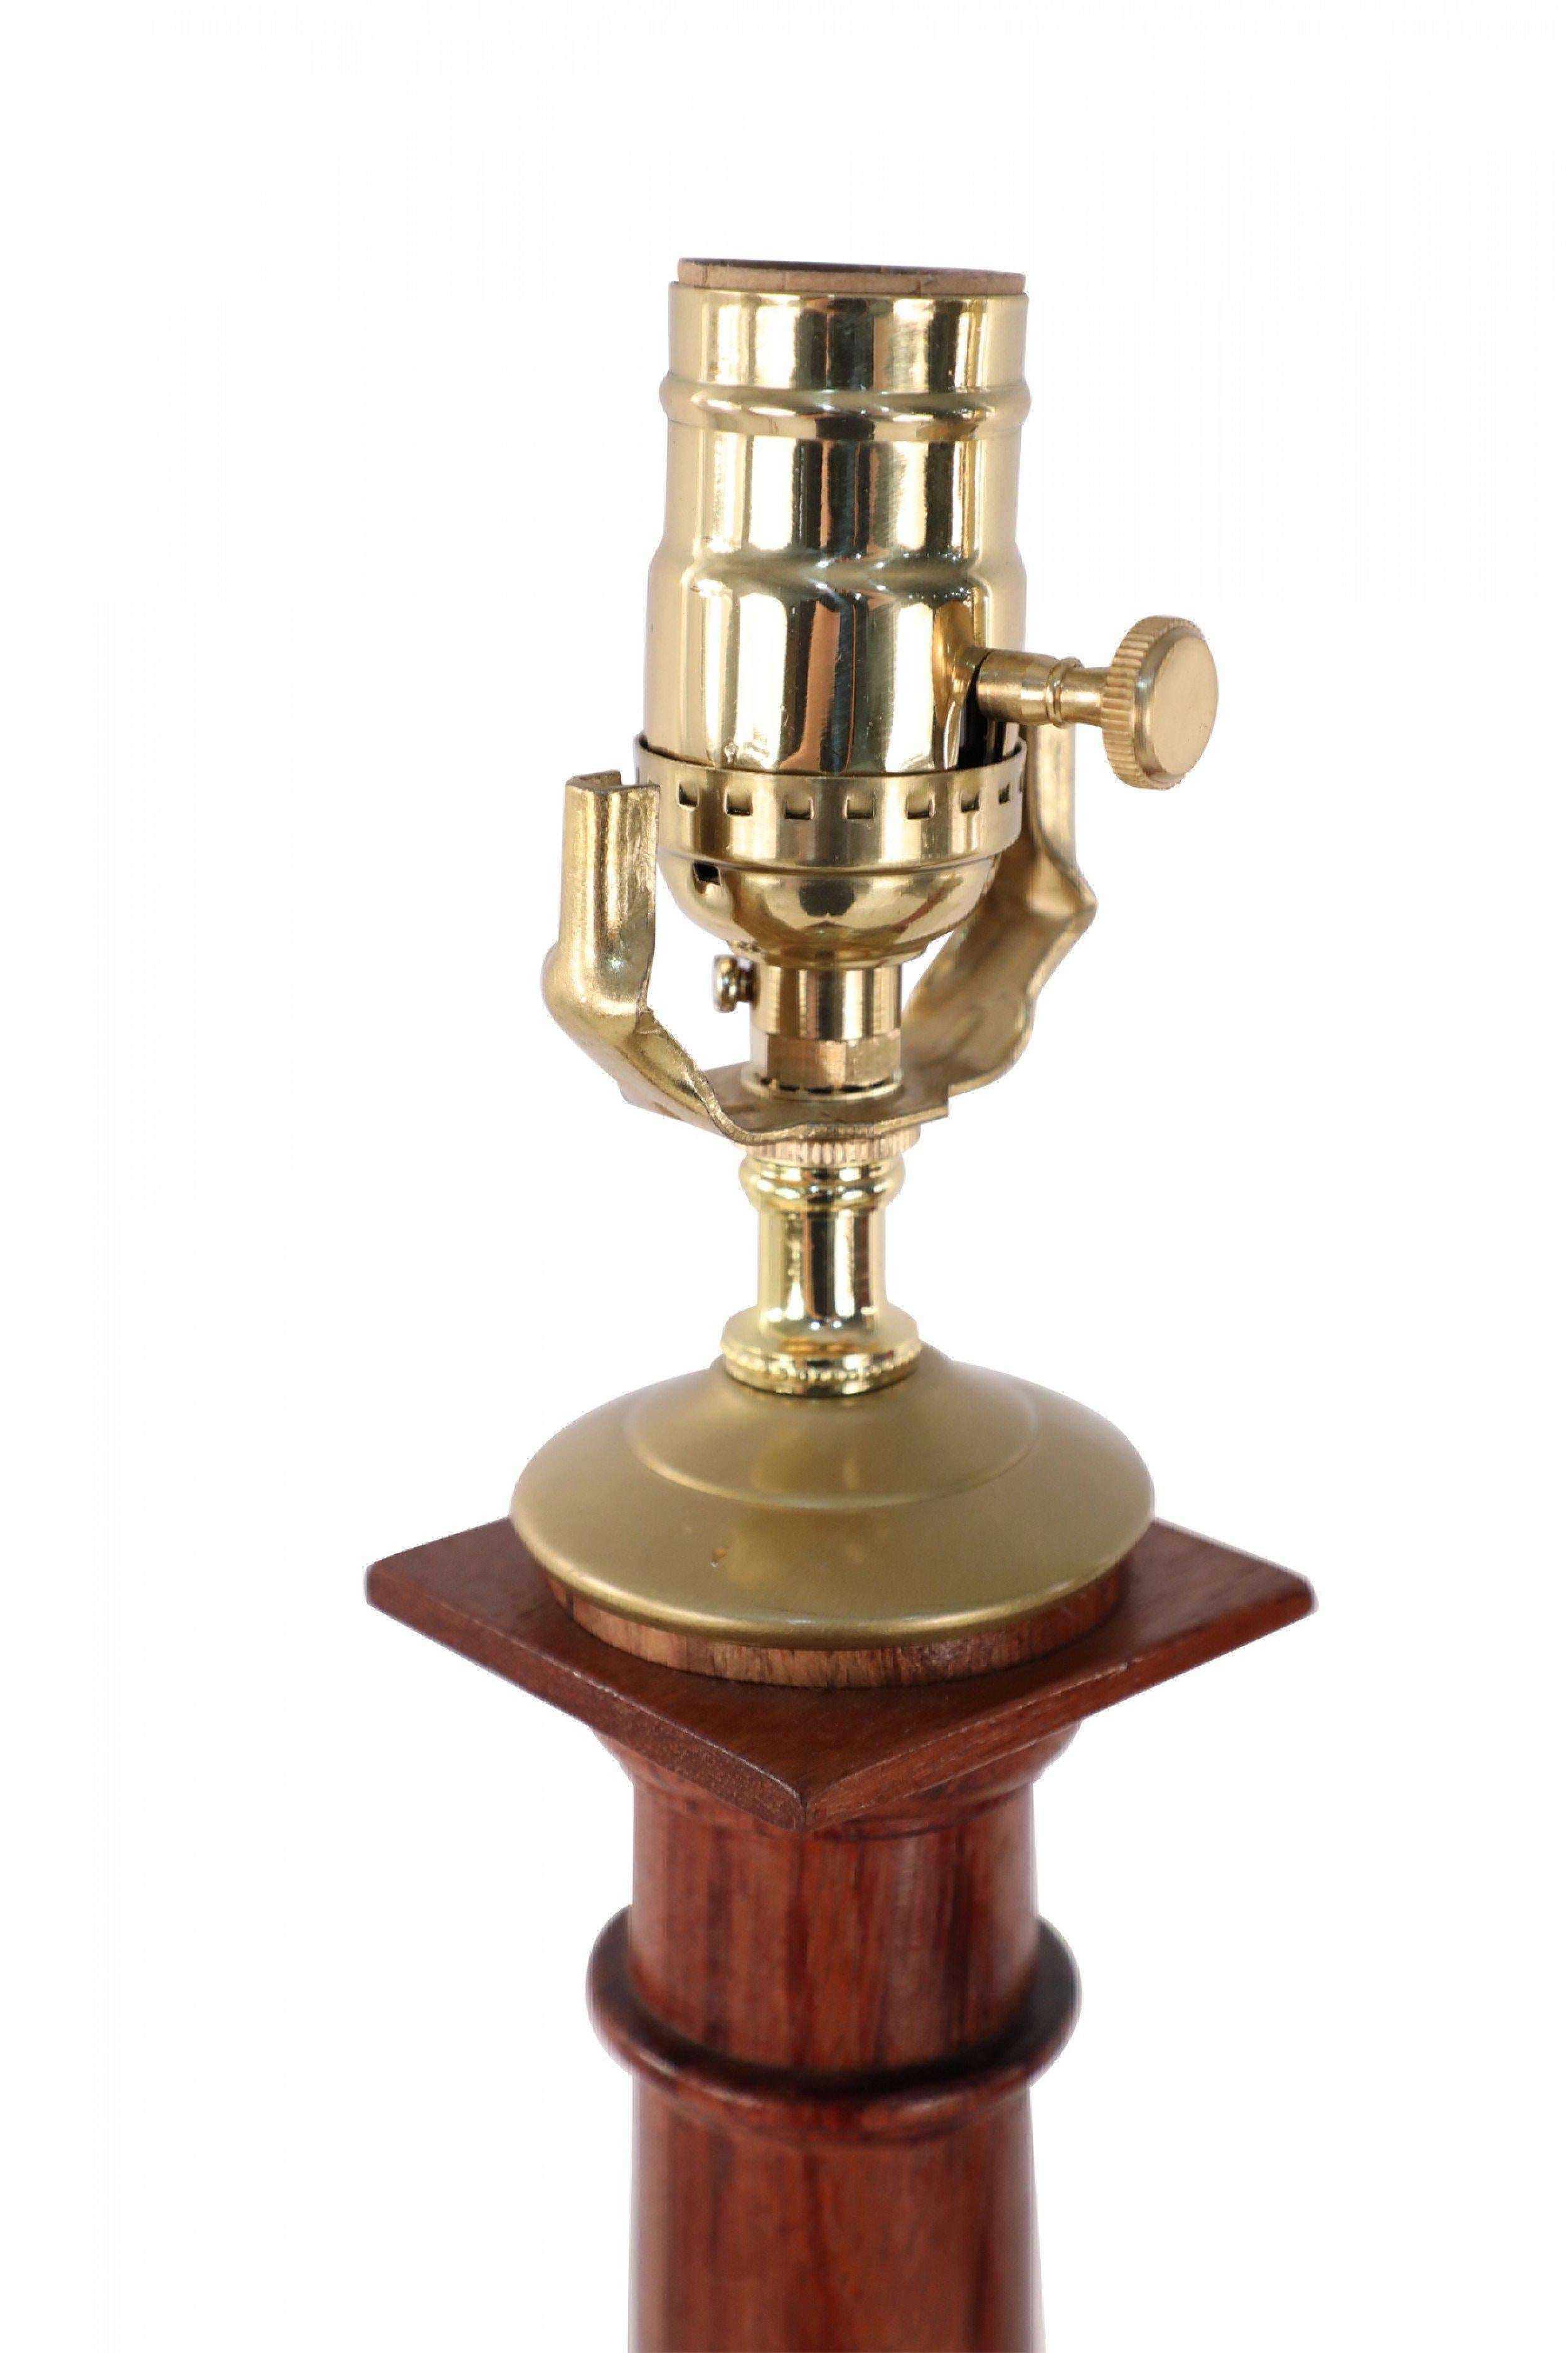 Pair of Italian Neo-classic style stained wooden table lamps with column shaped bodies on a raised square base and brass hardware (priced as pair).